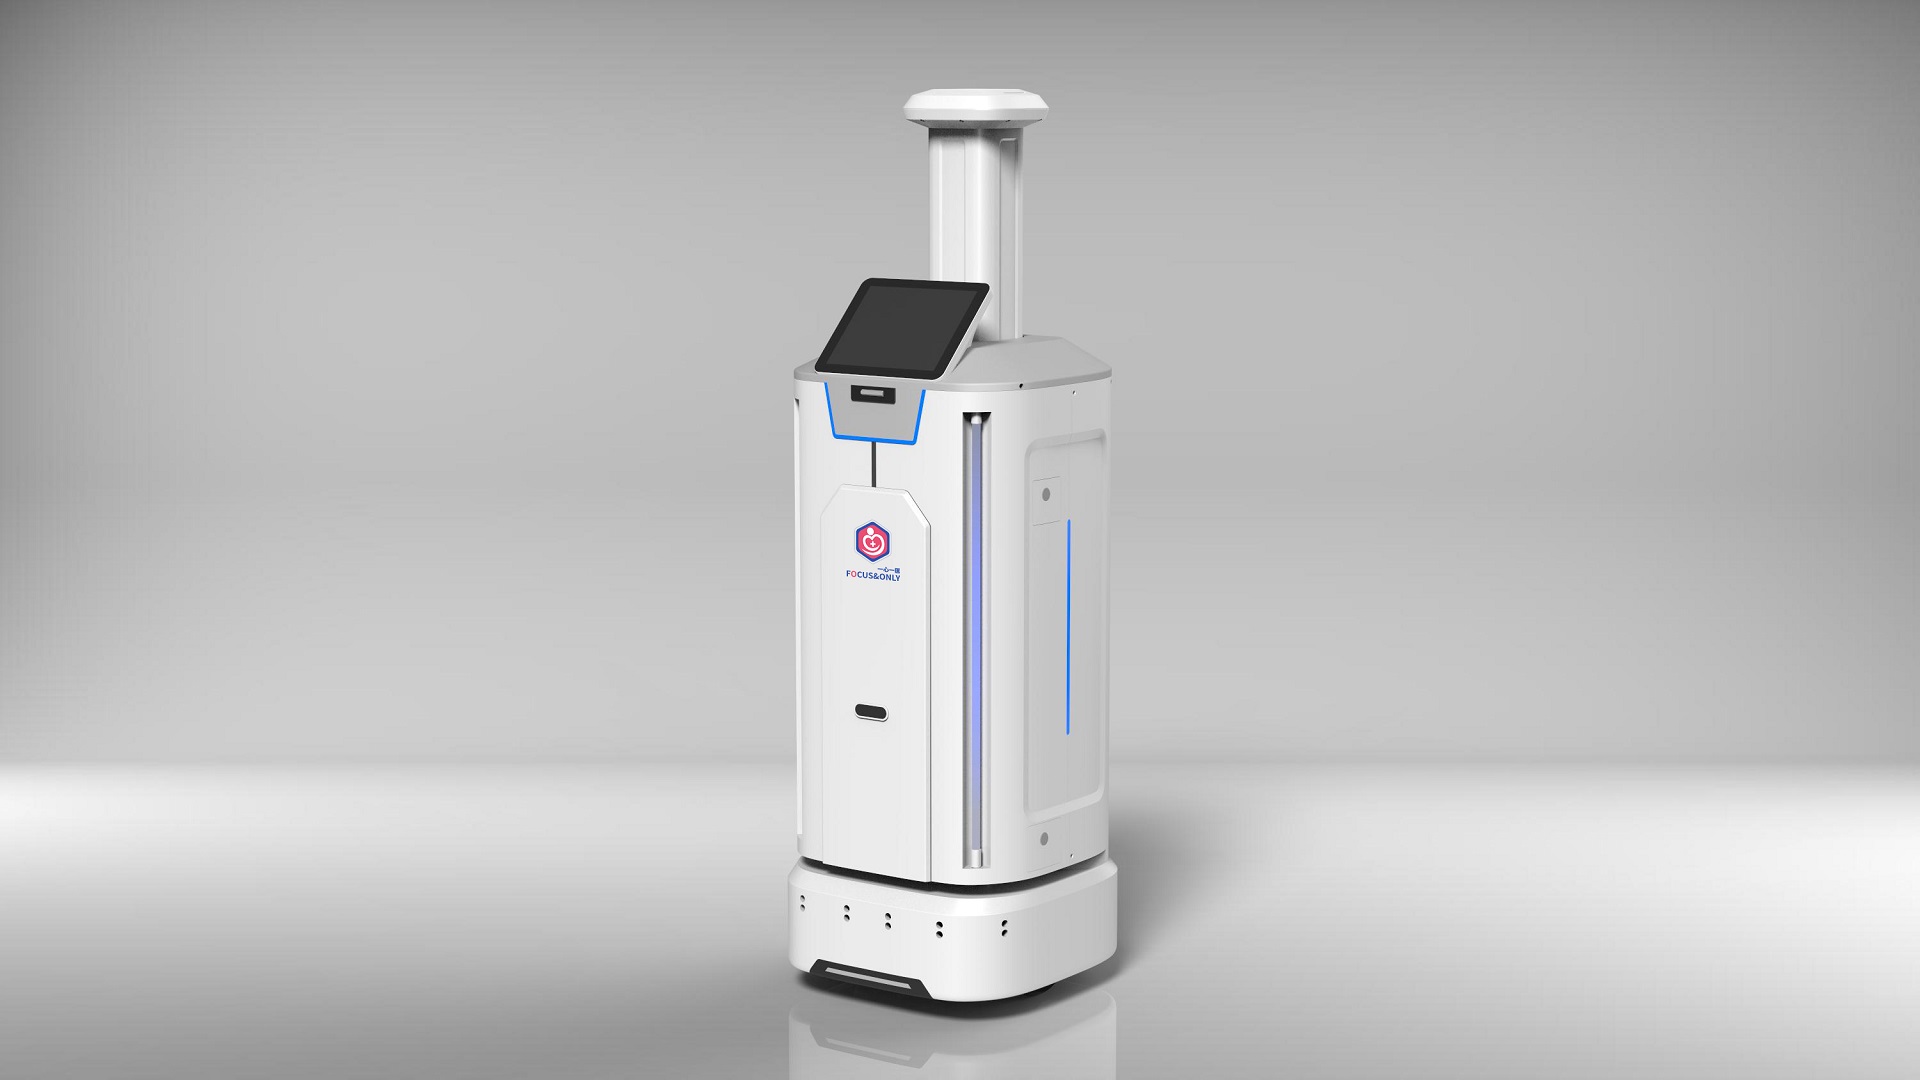 Intelligent epidemic prevention and disinfection robot